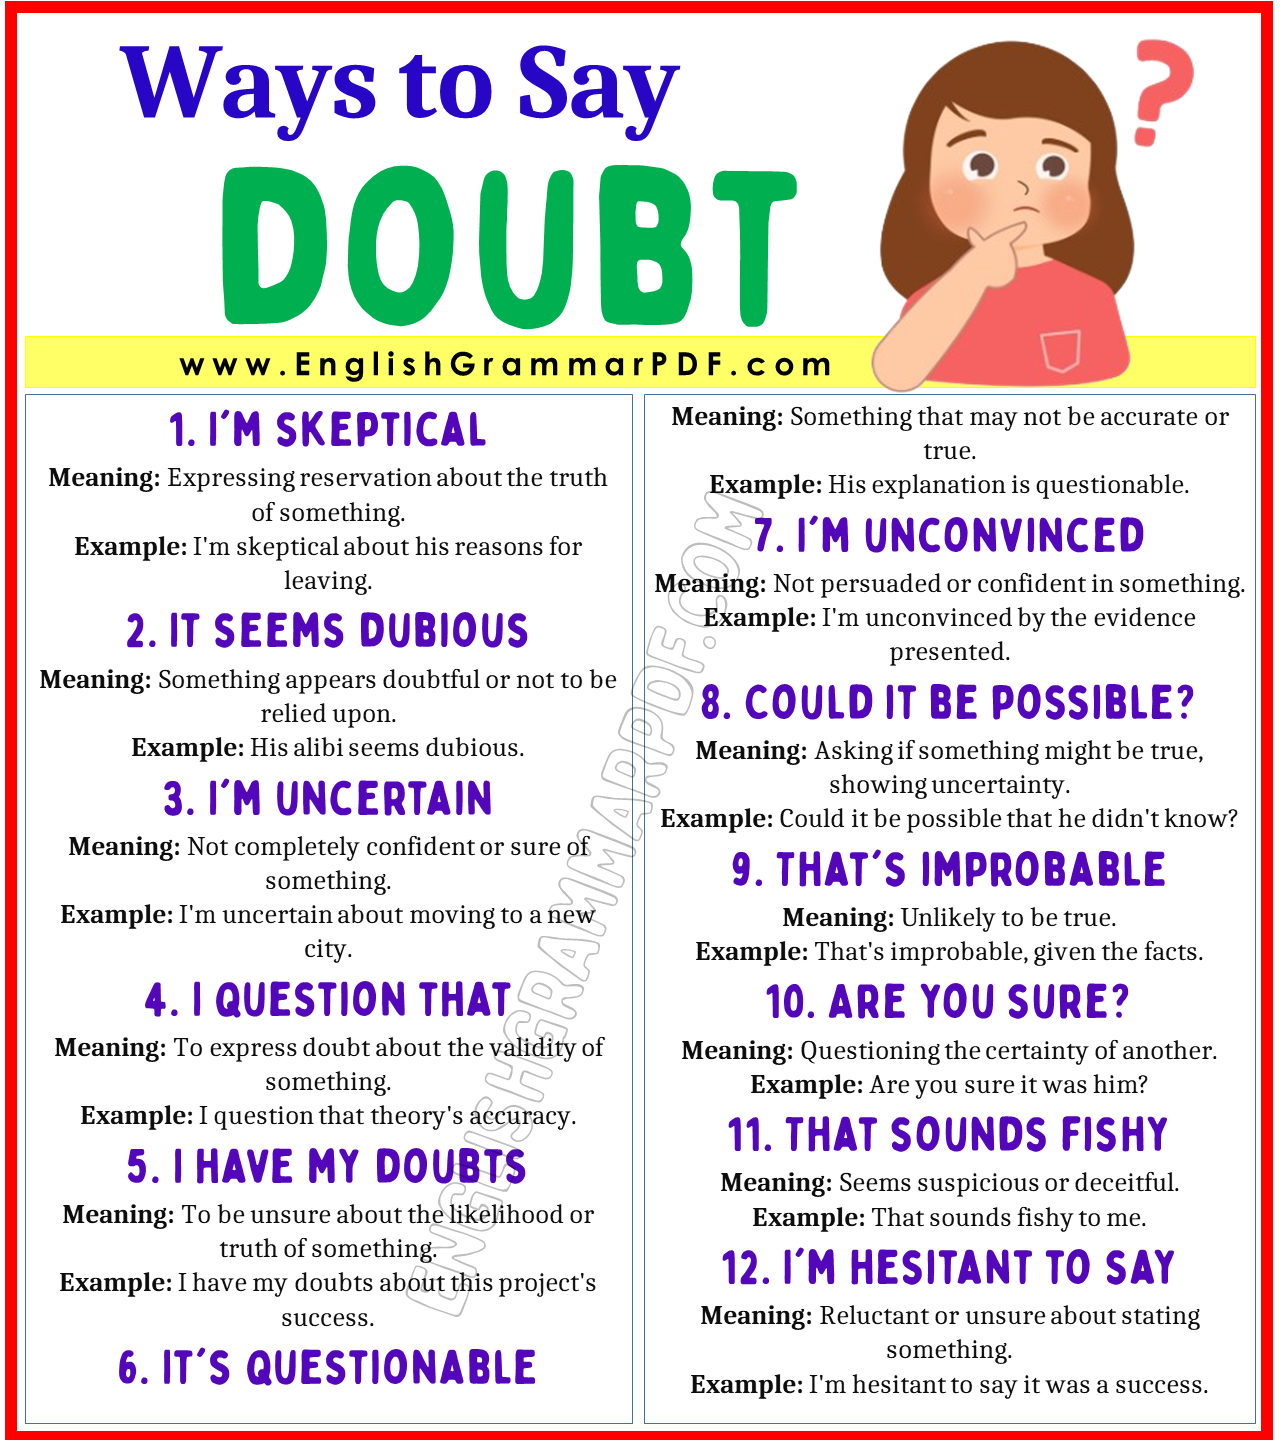 Ways to Say Doubt